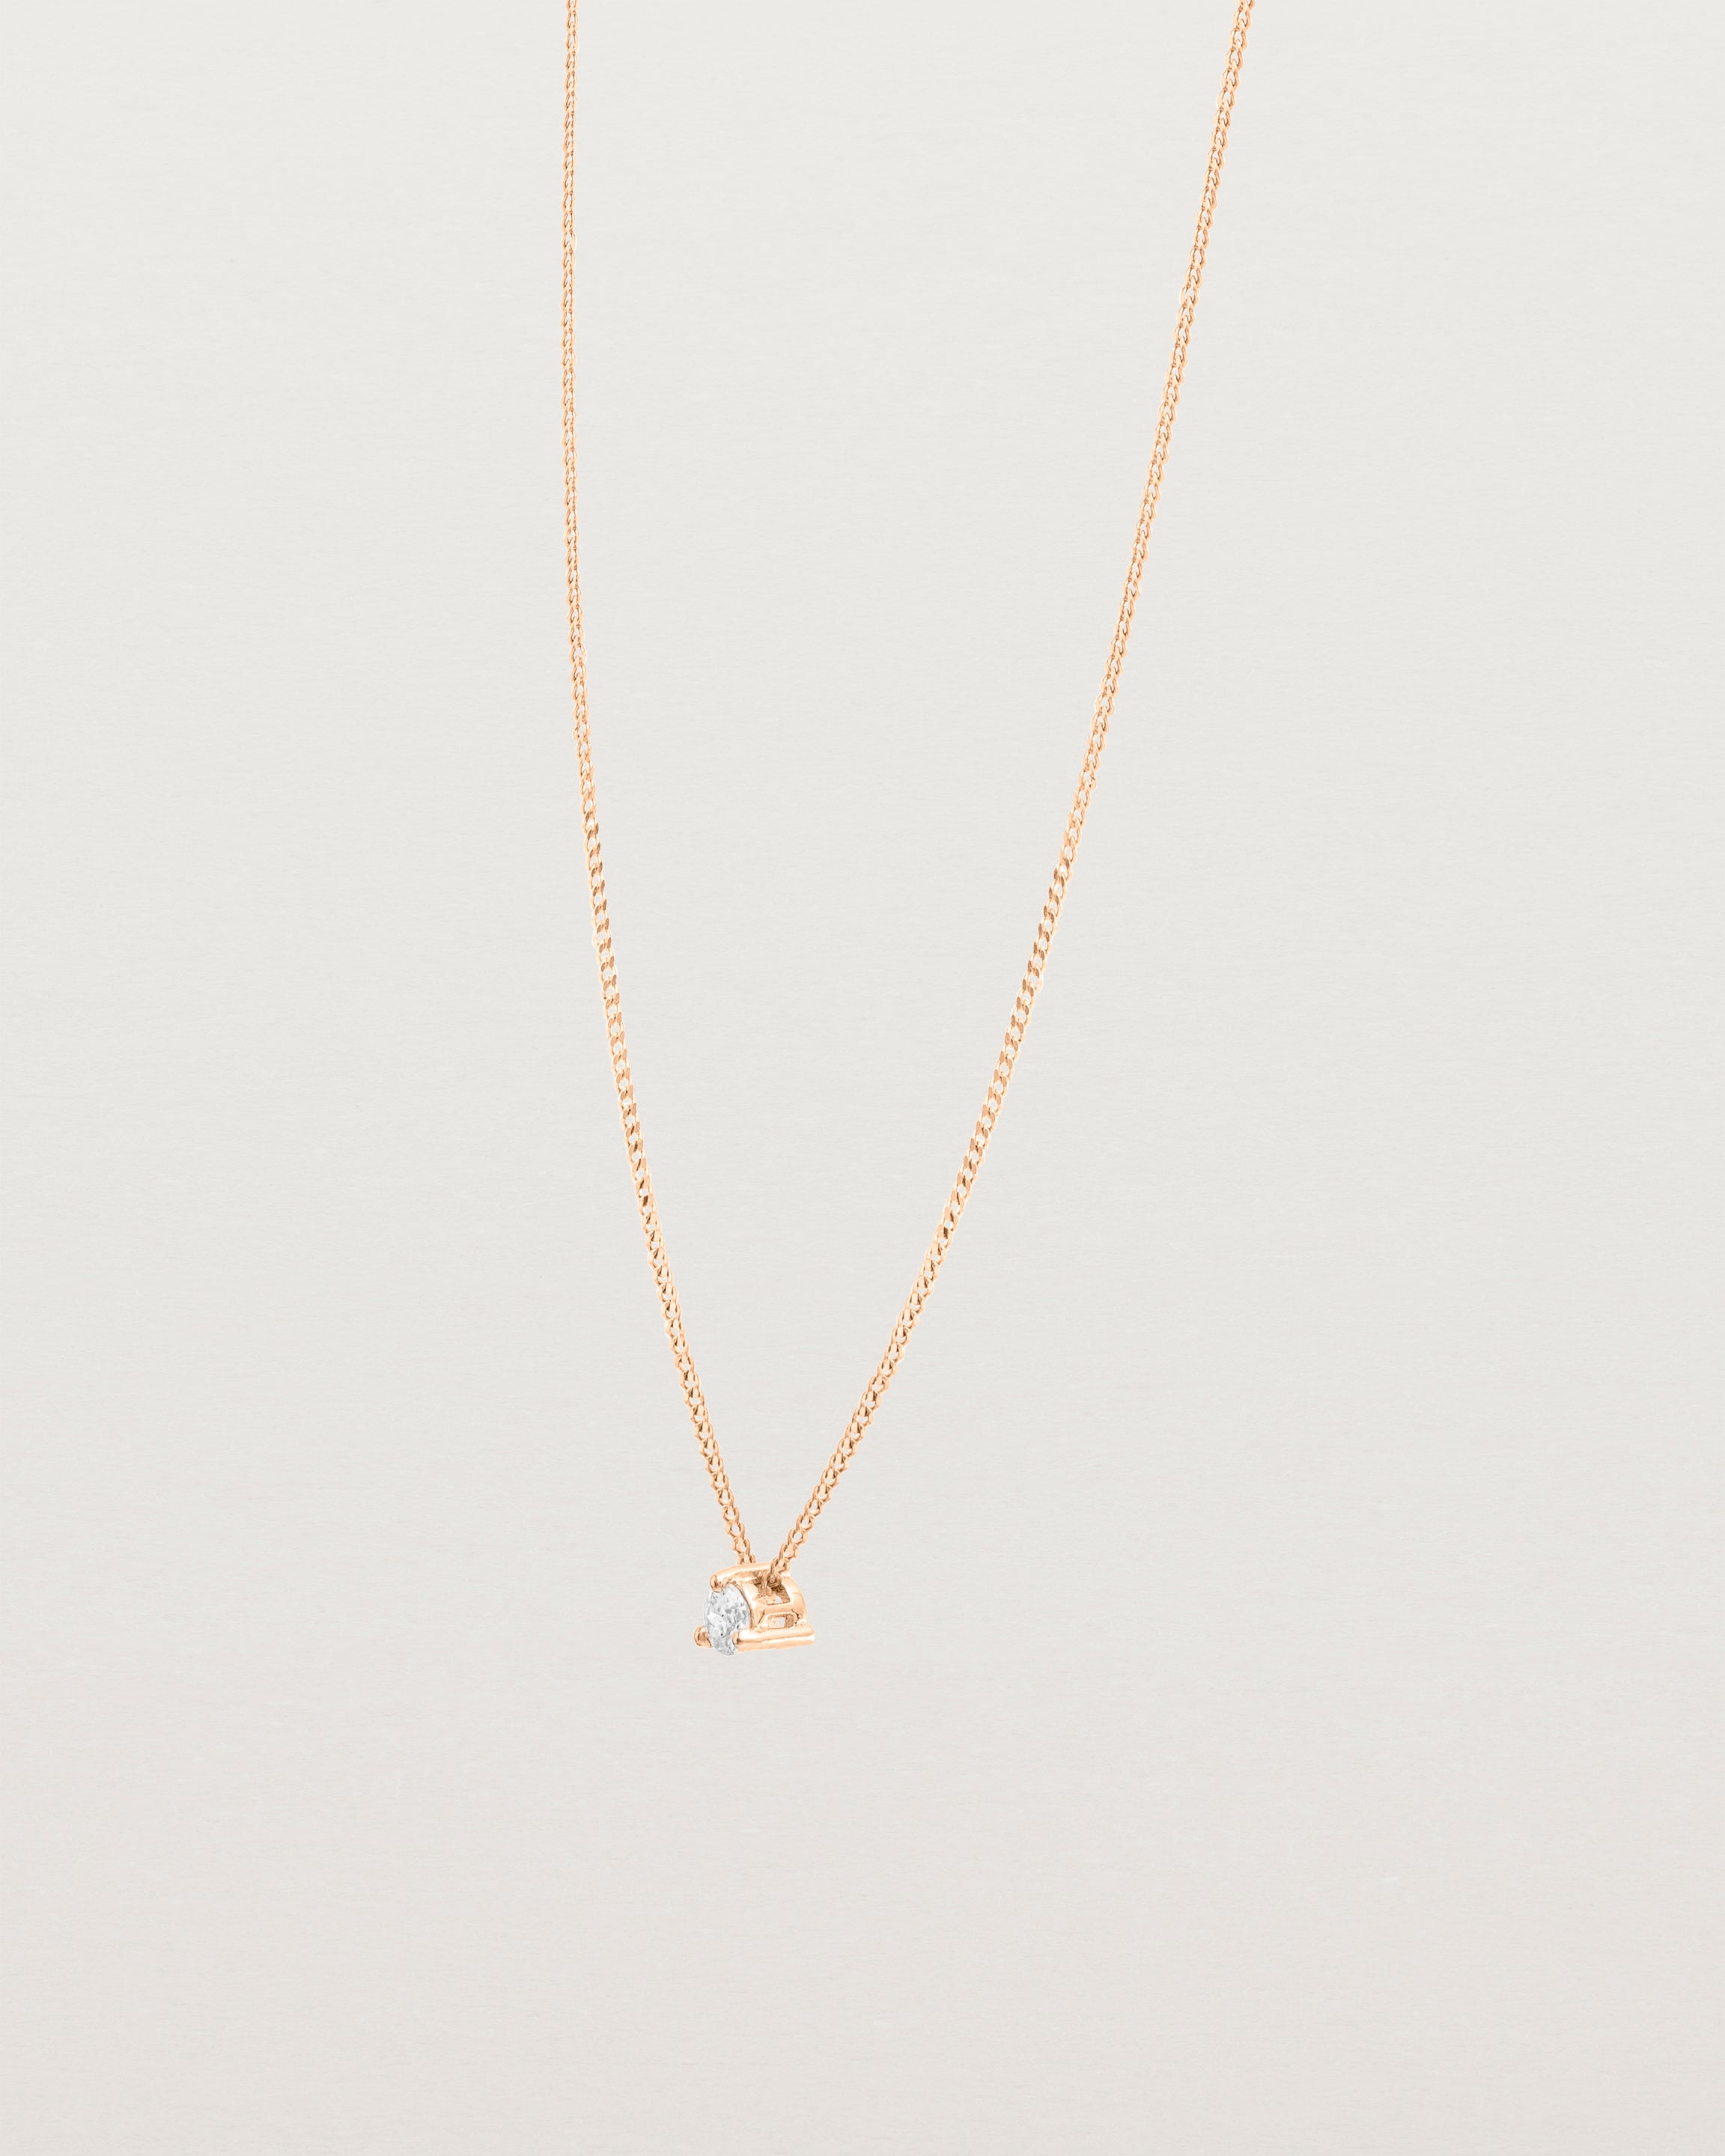 Angled view of the Aiona Slider Necklace | Old Cut Diamond | Rose Gold.